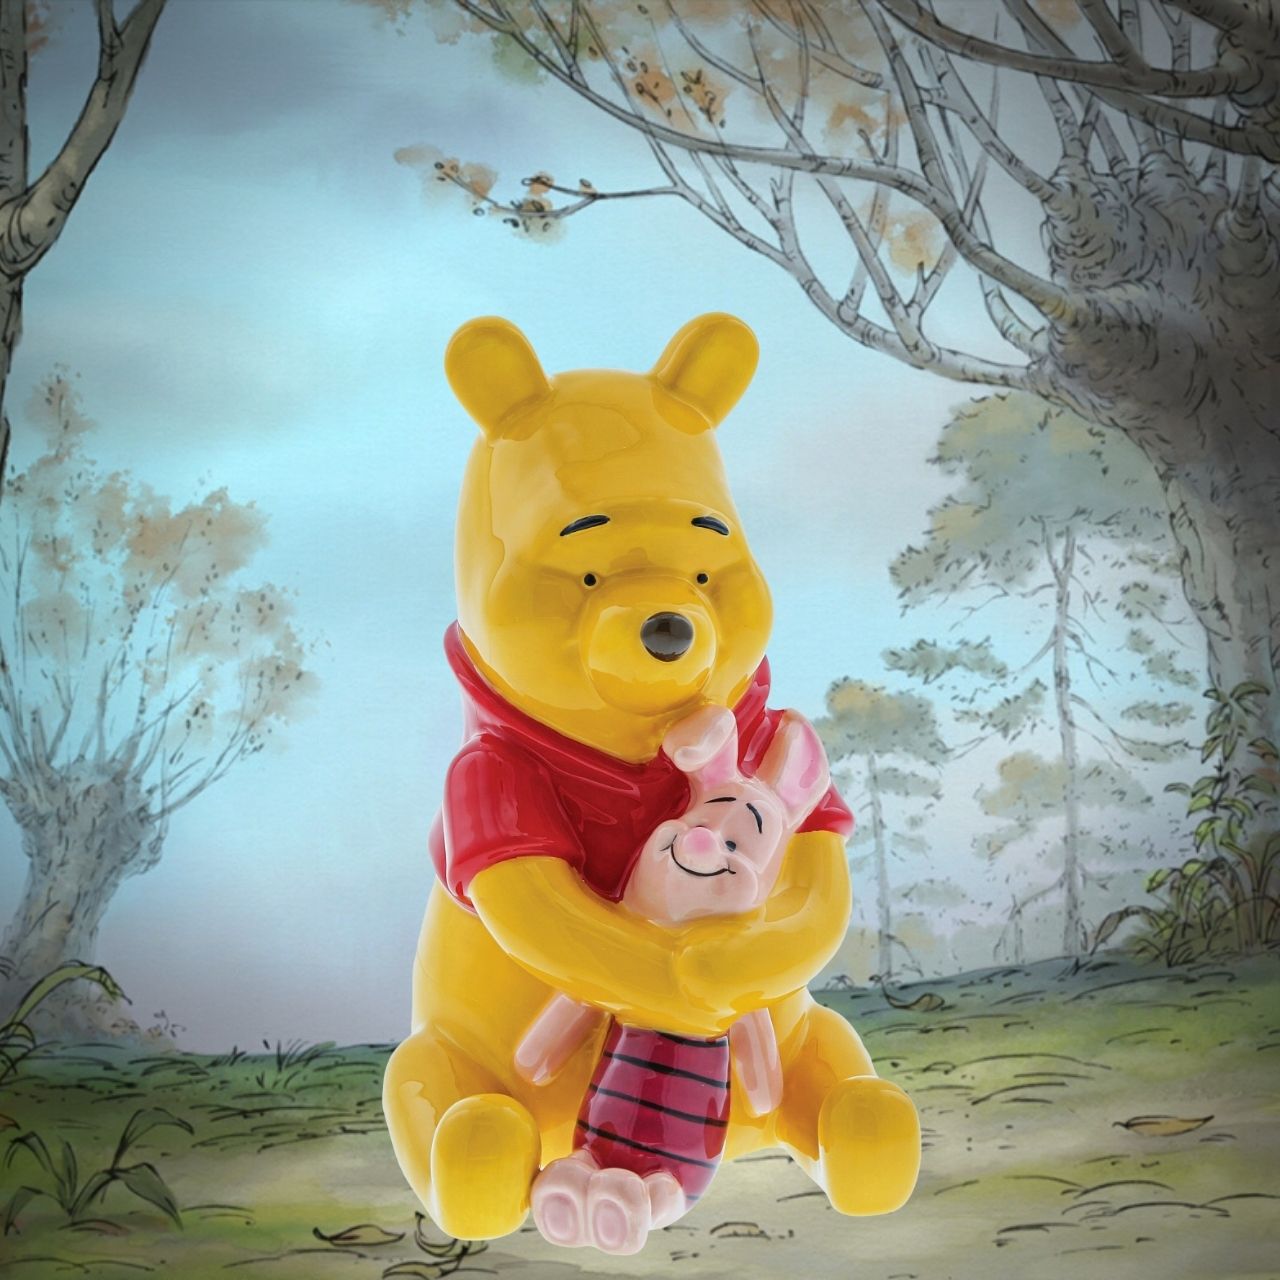 Best of Friends Winnie the Pooh & Piglet Money Bank  It is more friendly with two. This money bank shows Winnie the Pooh and Piglet from the 100 Acre Wood embracing in a loving hug. Ideal for any Pooh fan to keep their loose change safe.